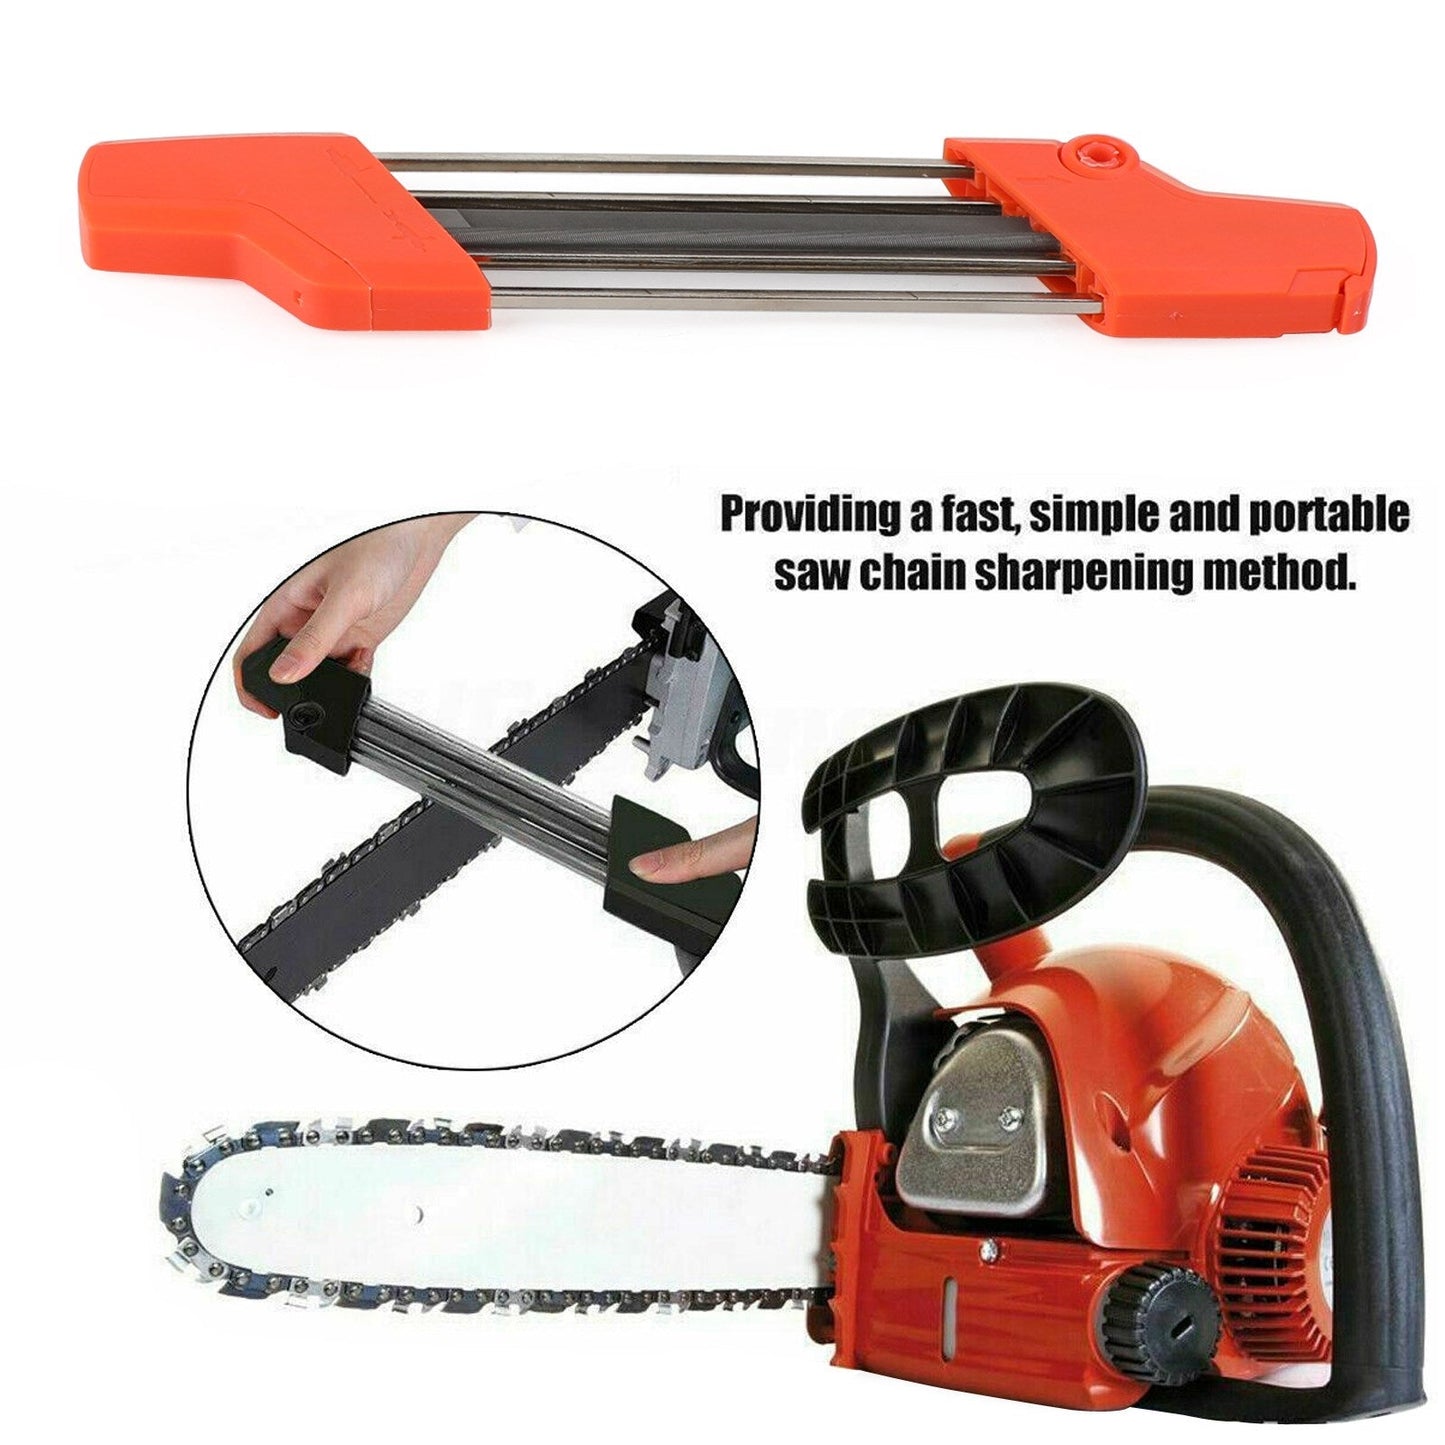 2 in 1 Easy Chainsaw File Kette Spitzer Kits 7/32 5,5 mm fit STIHL 3/8 "P 404"